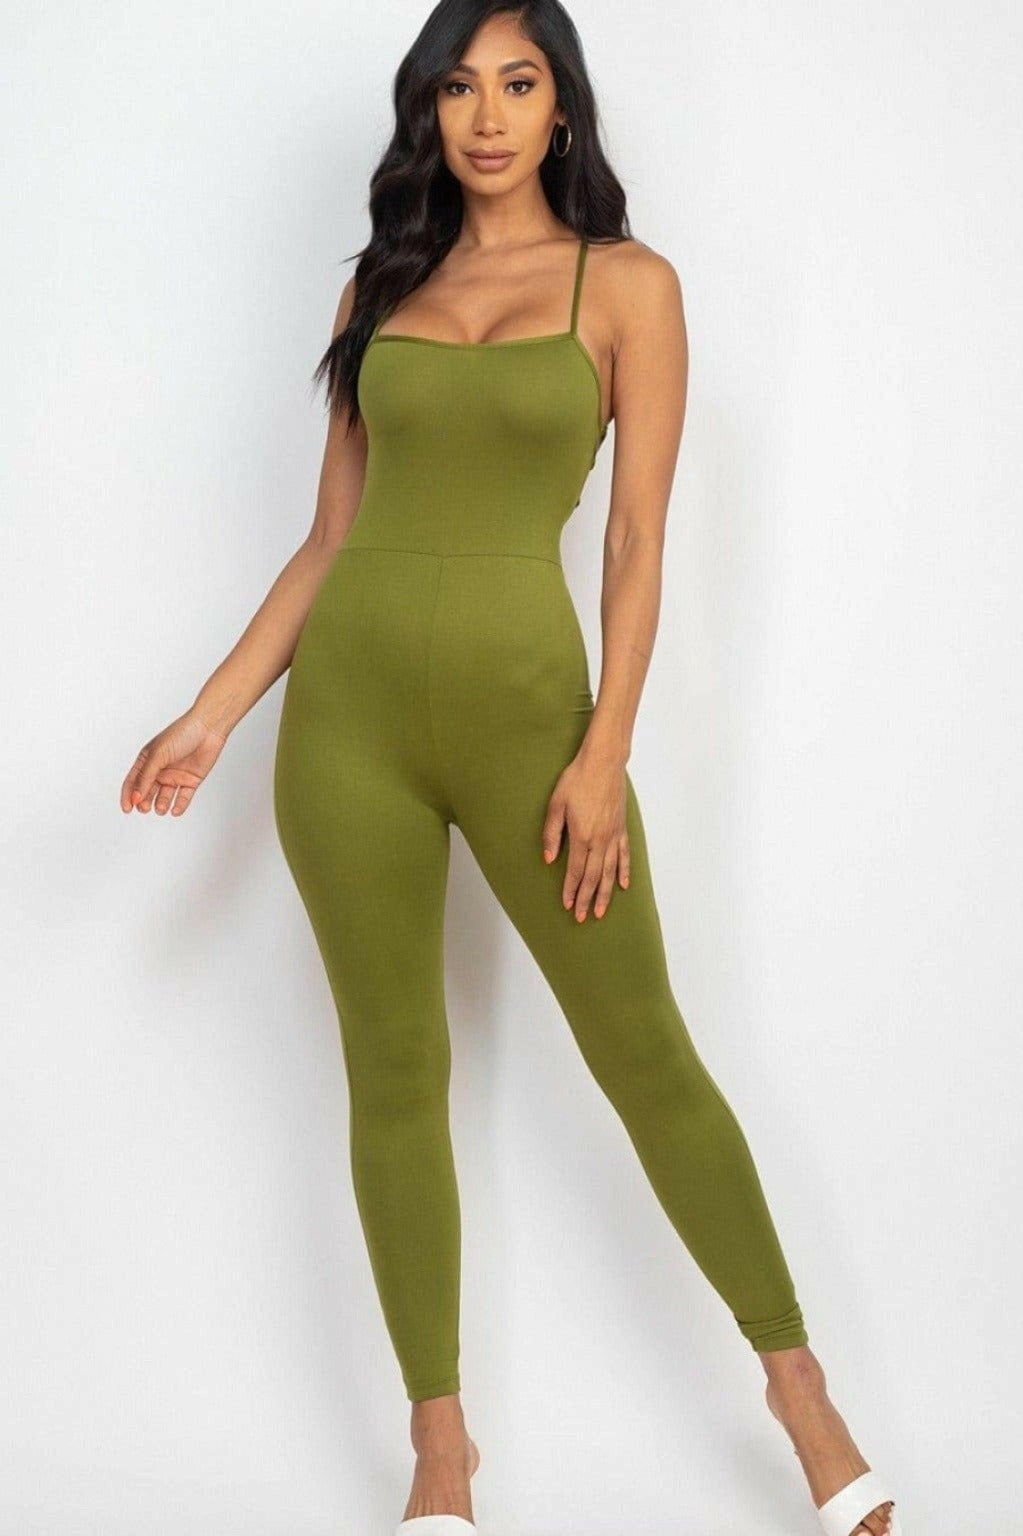 Epicplacess jumpsuits SMALL / GREEN / UNITED STATES CRISS Women's  Linen Cotton Jumpsuits UJP-842